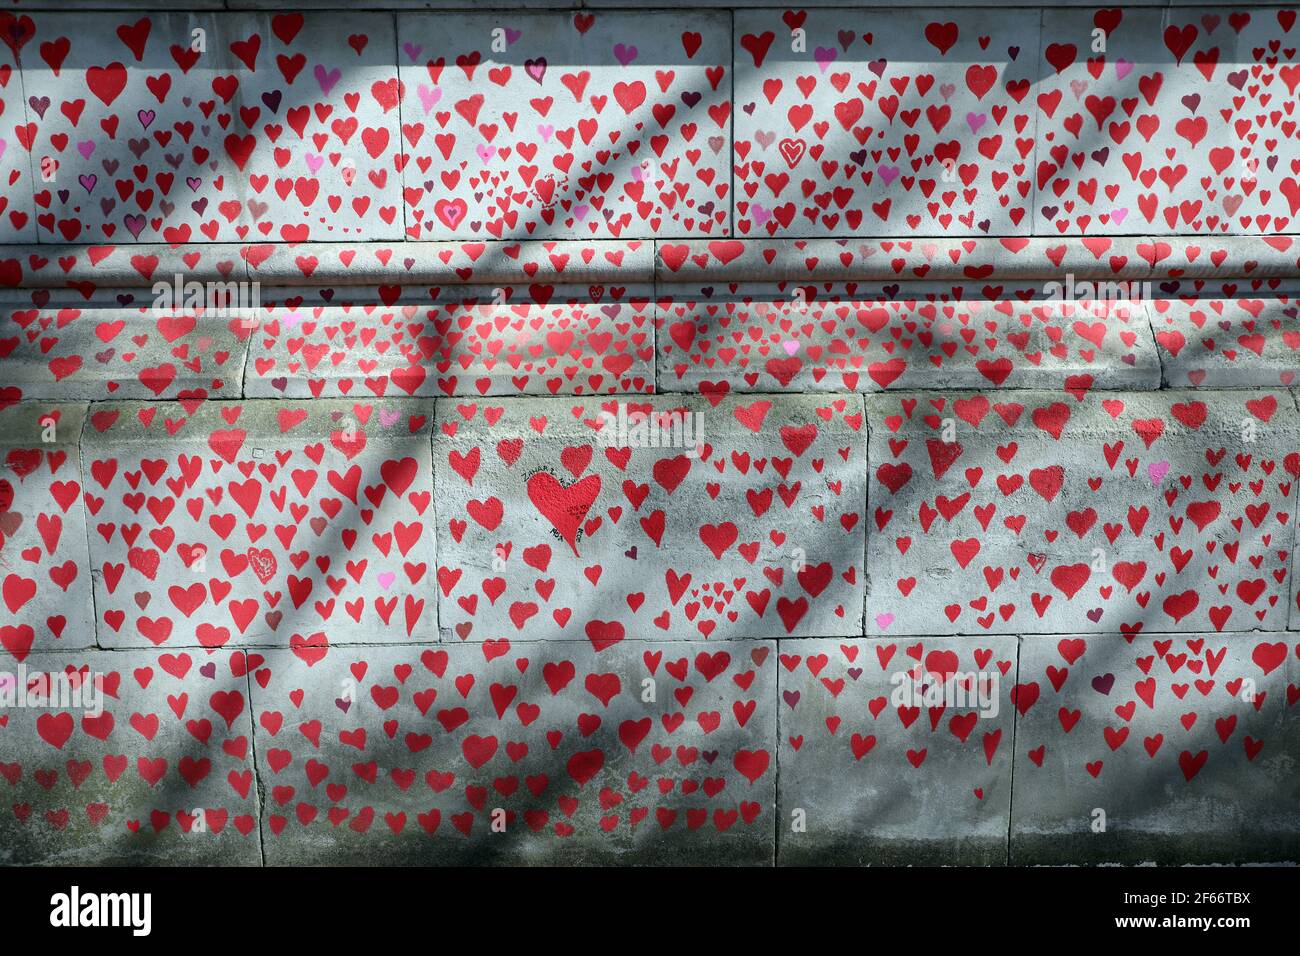 London, UK. 30th Mar, 2021. Hearts of the National Covid Memorial drawn by the Bereaved Friends and Family of Covid-19 on the embankment of the River Thames opposite the Houses of Parliament. The first of around 150,000 hearts which will be drawn on several hundred metres of the wall outside St. Thomas' Hospital in London, where Boris Johnson was admitted on contracting Covid last year. Credit: Paul Brown/Alamy Live News Stock Photo